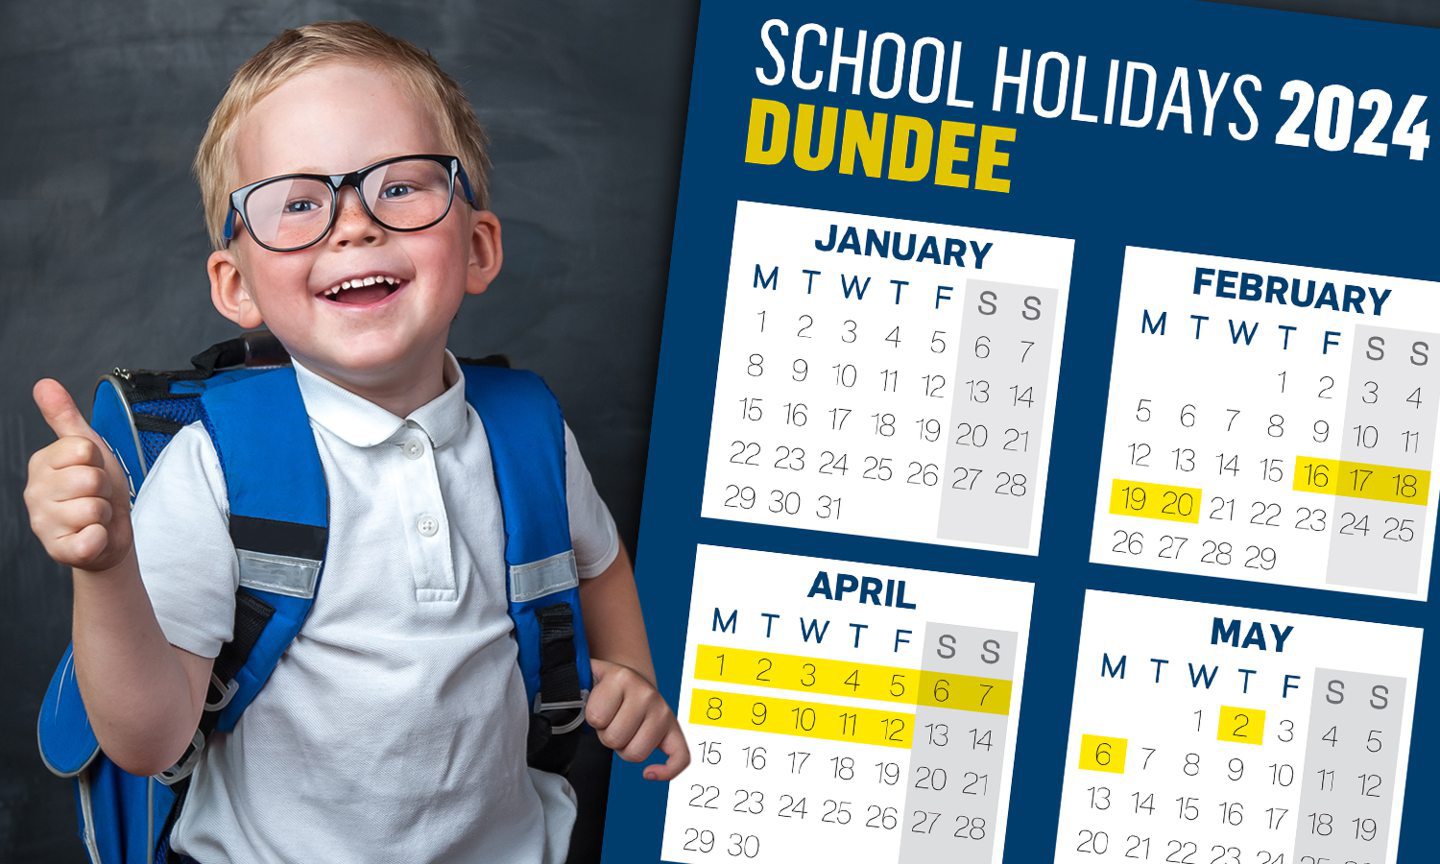 Dundee school holidays 2024 with printerfriendly calendars